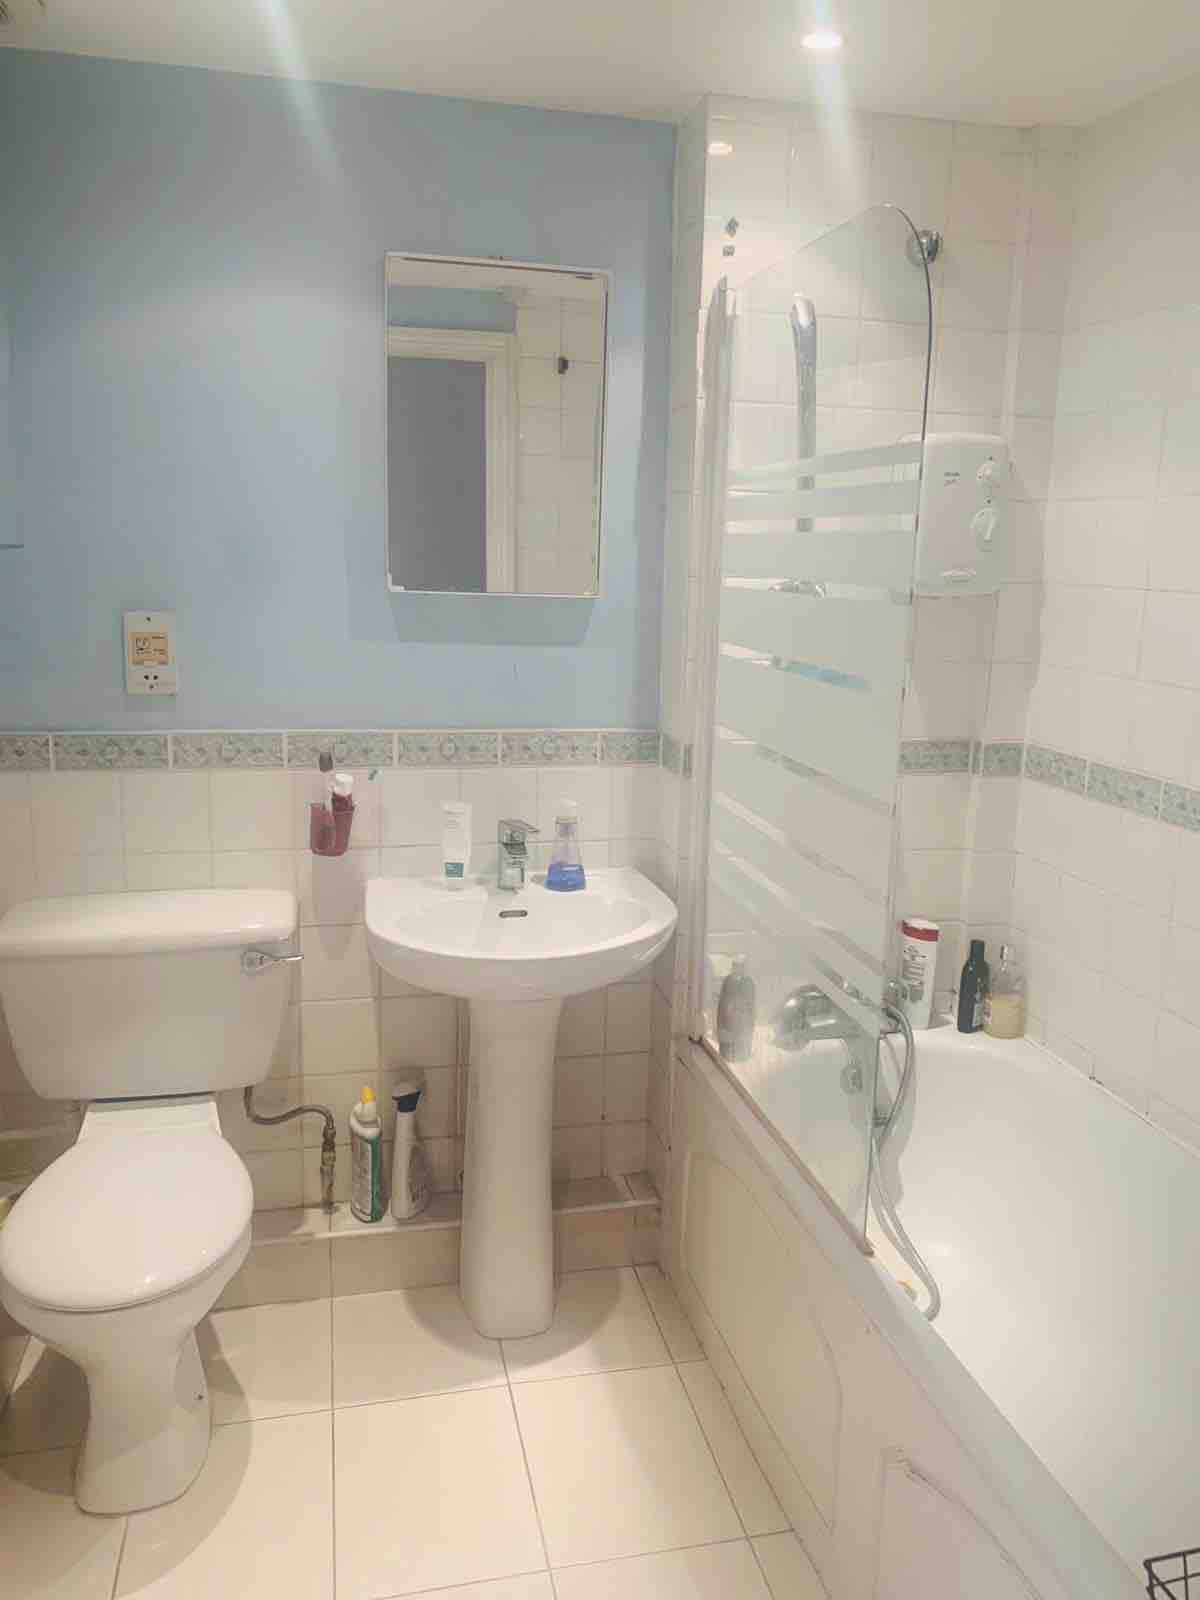 1 bed flat RoomsLocal image